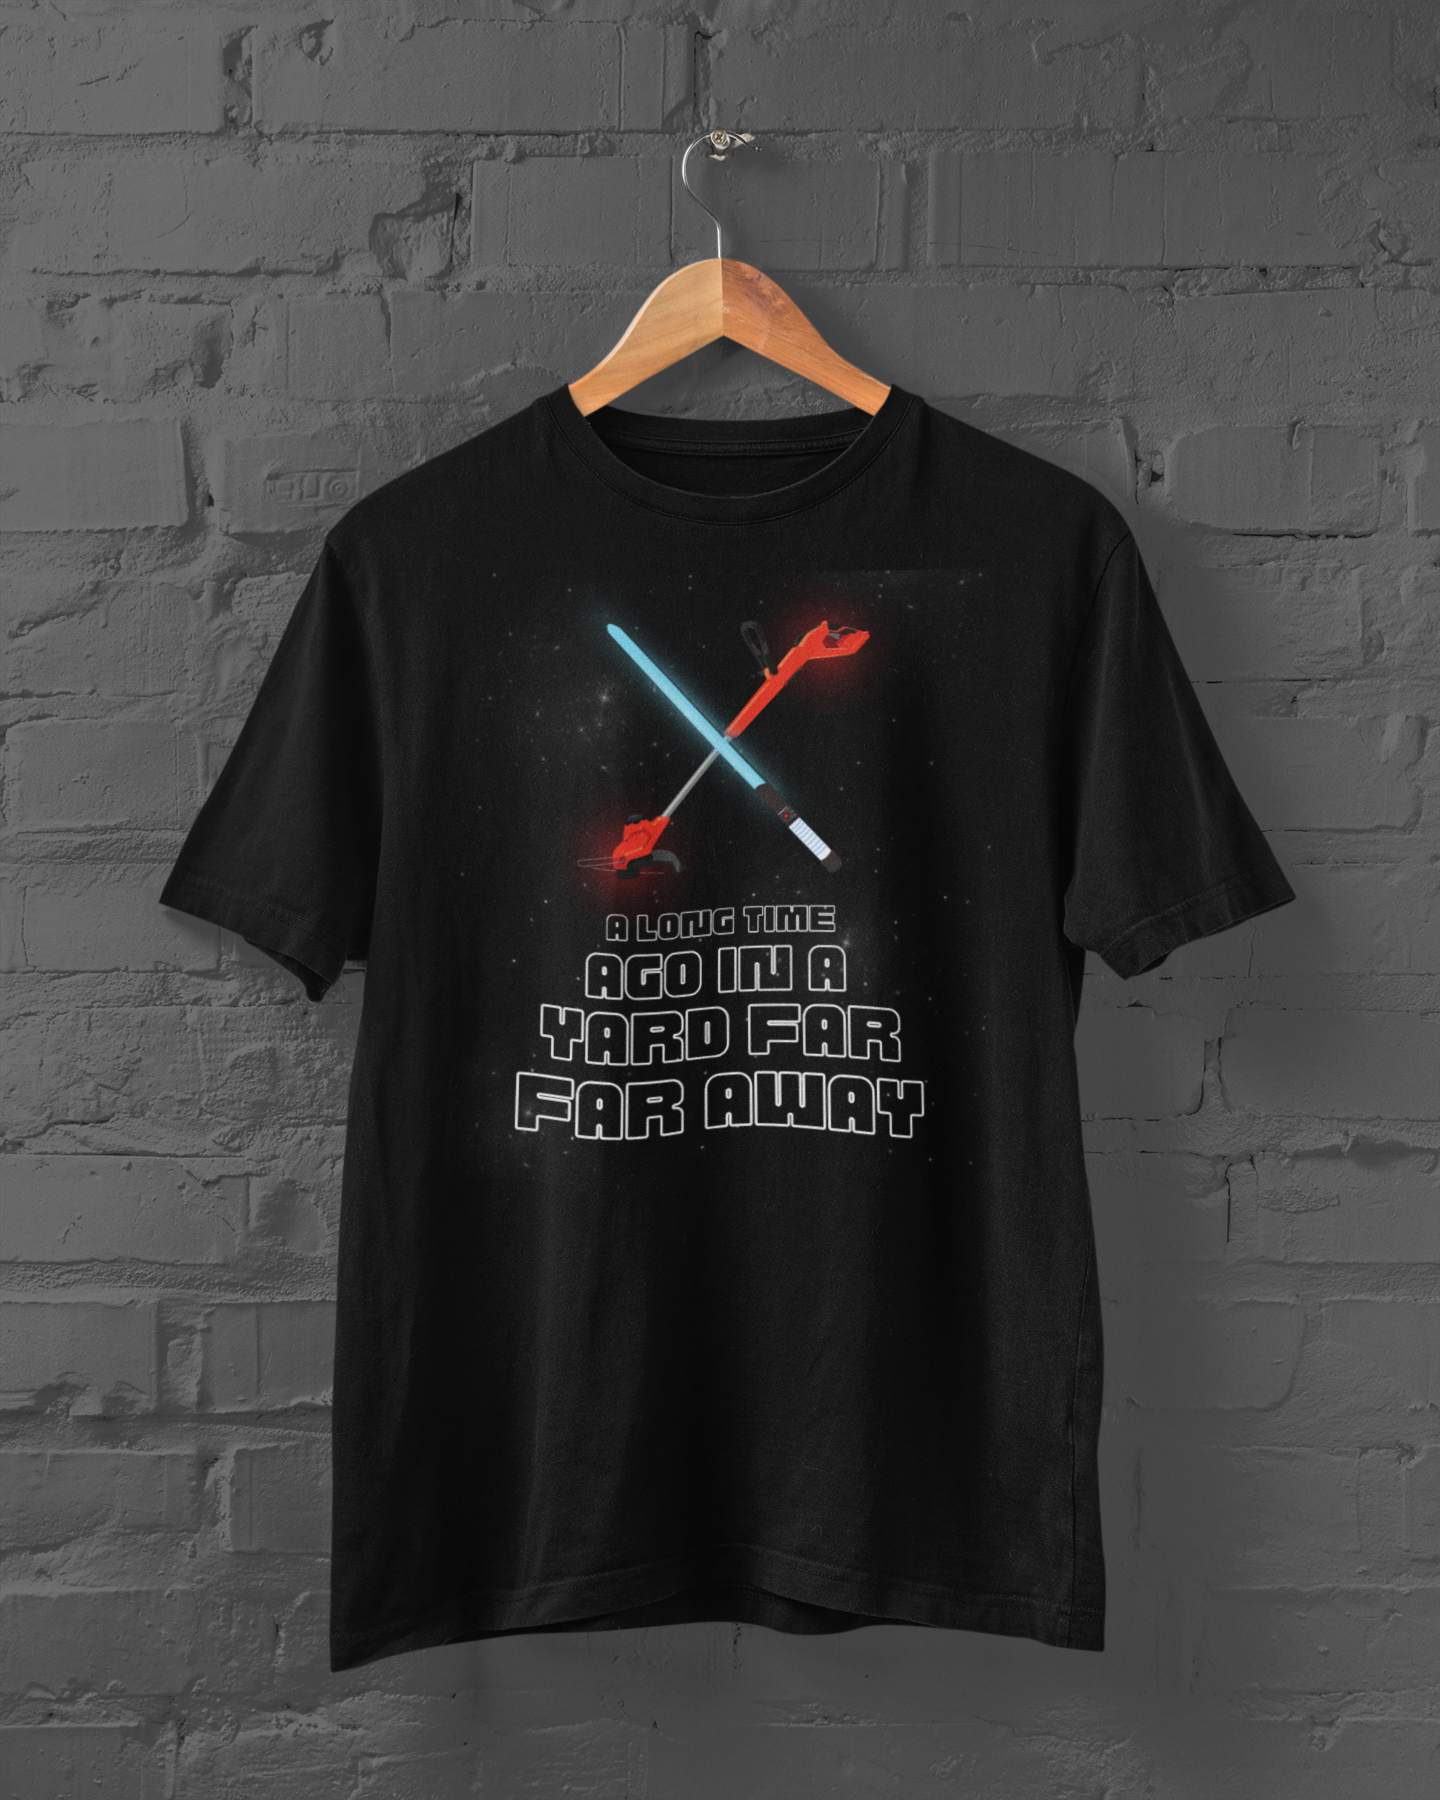 Are you a fan of all things grass and maybe also science fiction movies? Landscaper apparel brings you the perfect mix featuring a lightsaber and illuminated weed whacker. This is the perfect balance of both worlds. This lightweight cotton tee by landscaper apparel will keep you comfy and looking smart for all occasions.